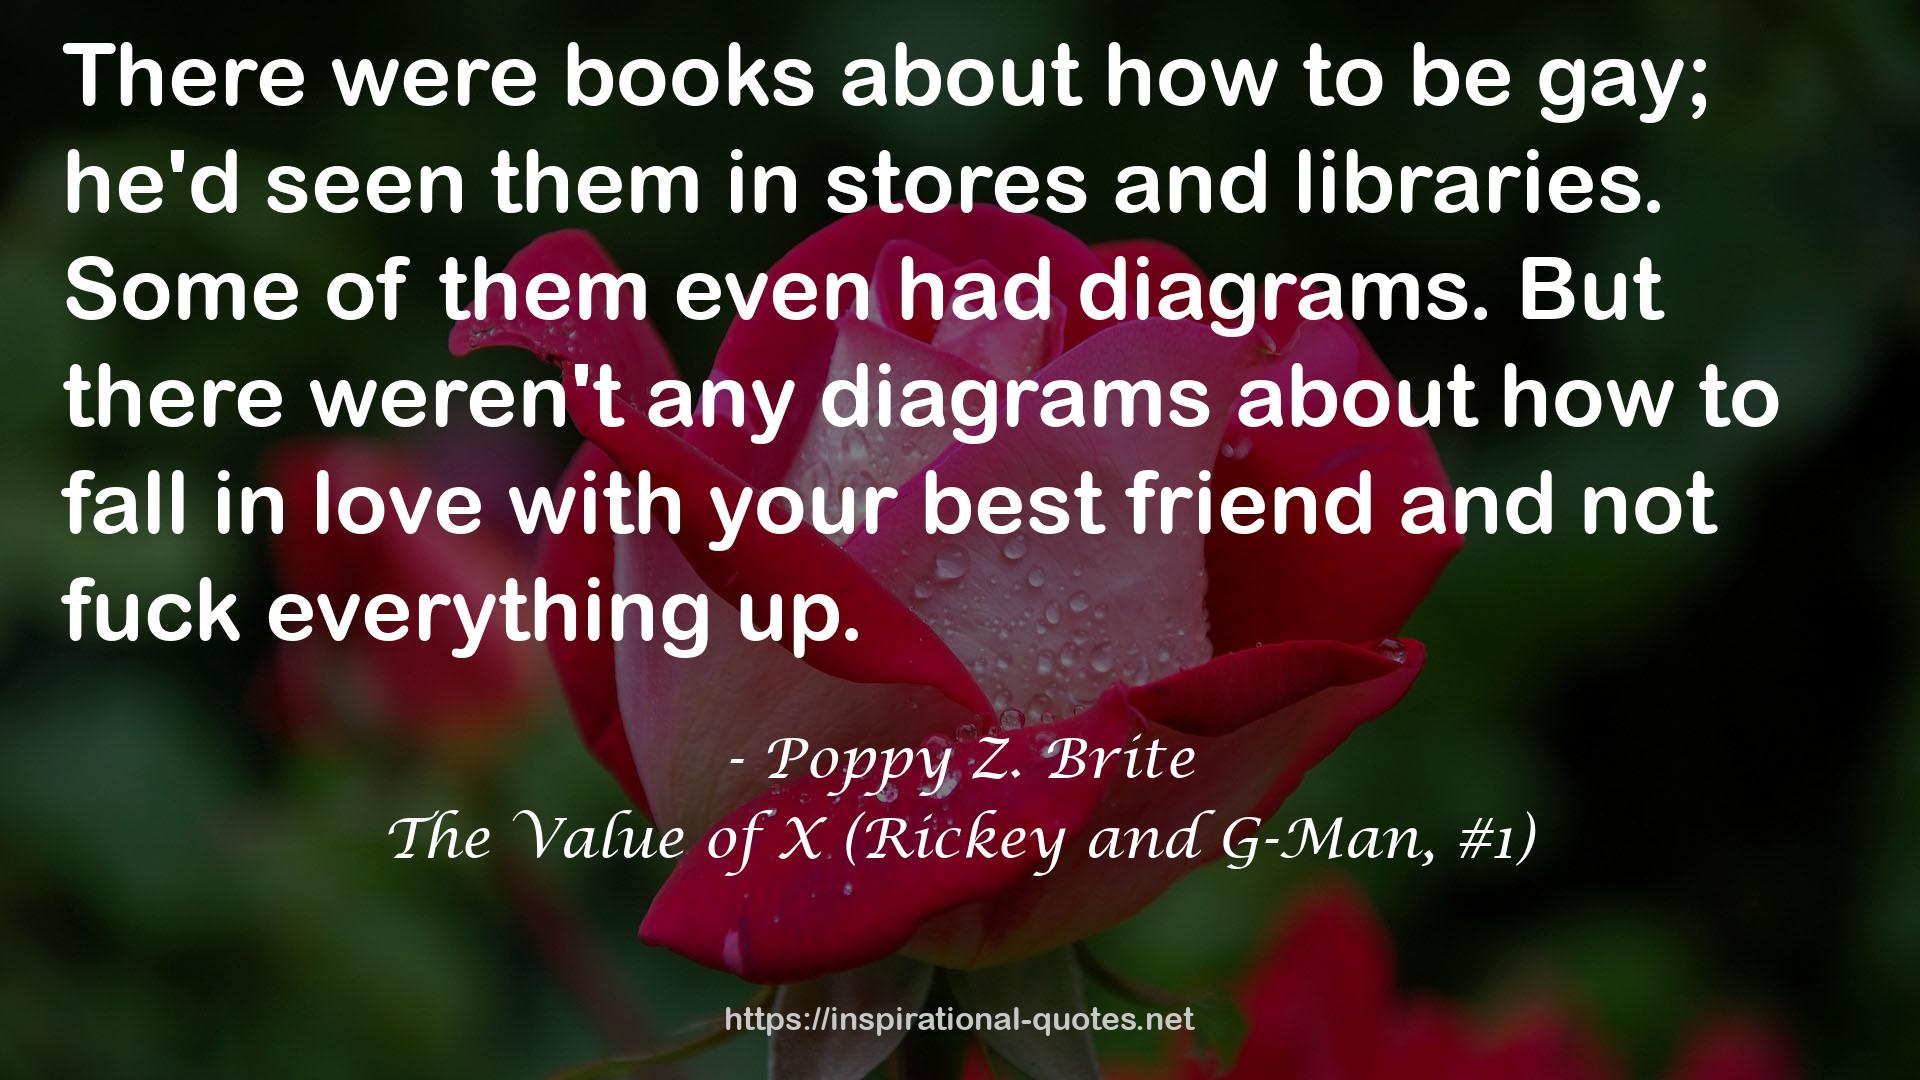 The Value of X (Rickey and G-Man, #1) QUOTES